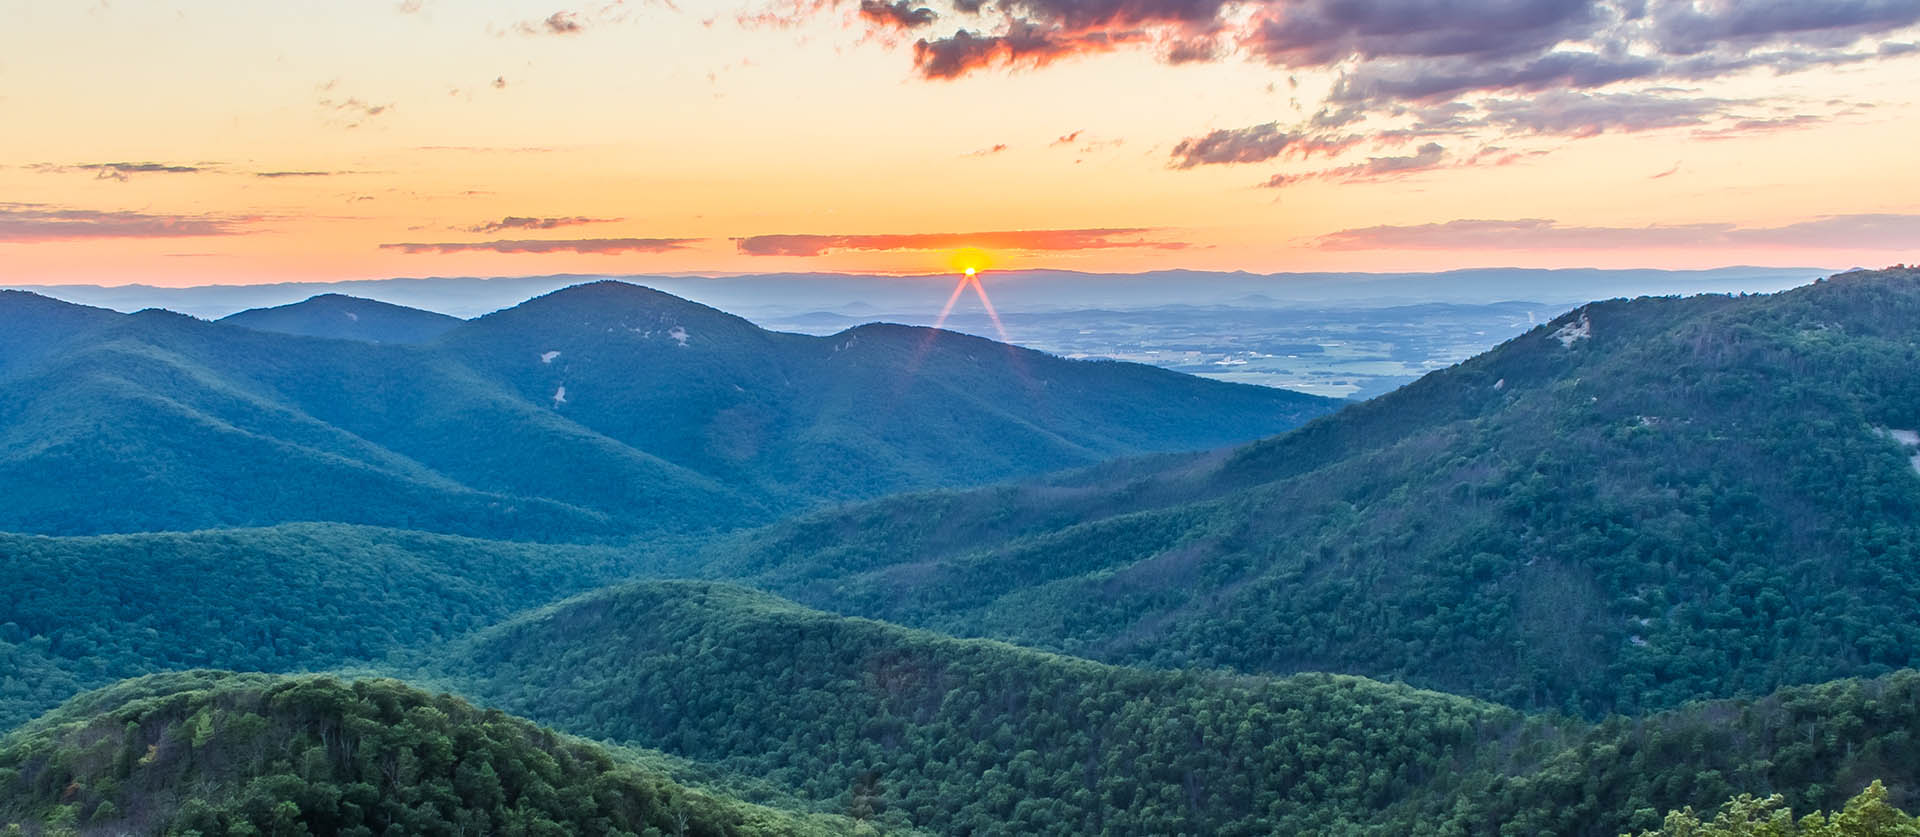 Page Valley, VA Packages & Deals